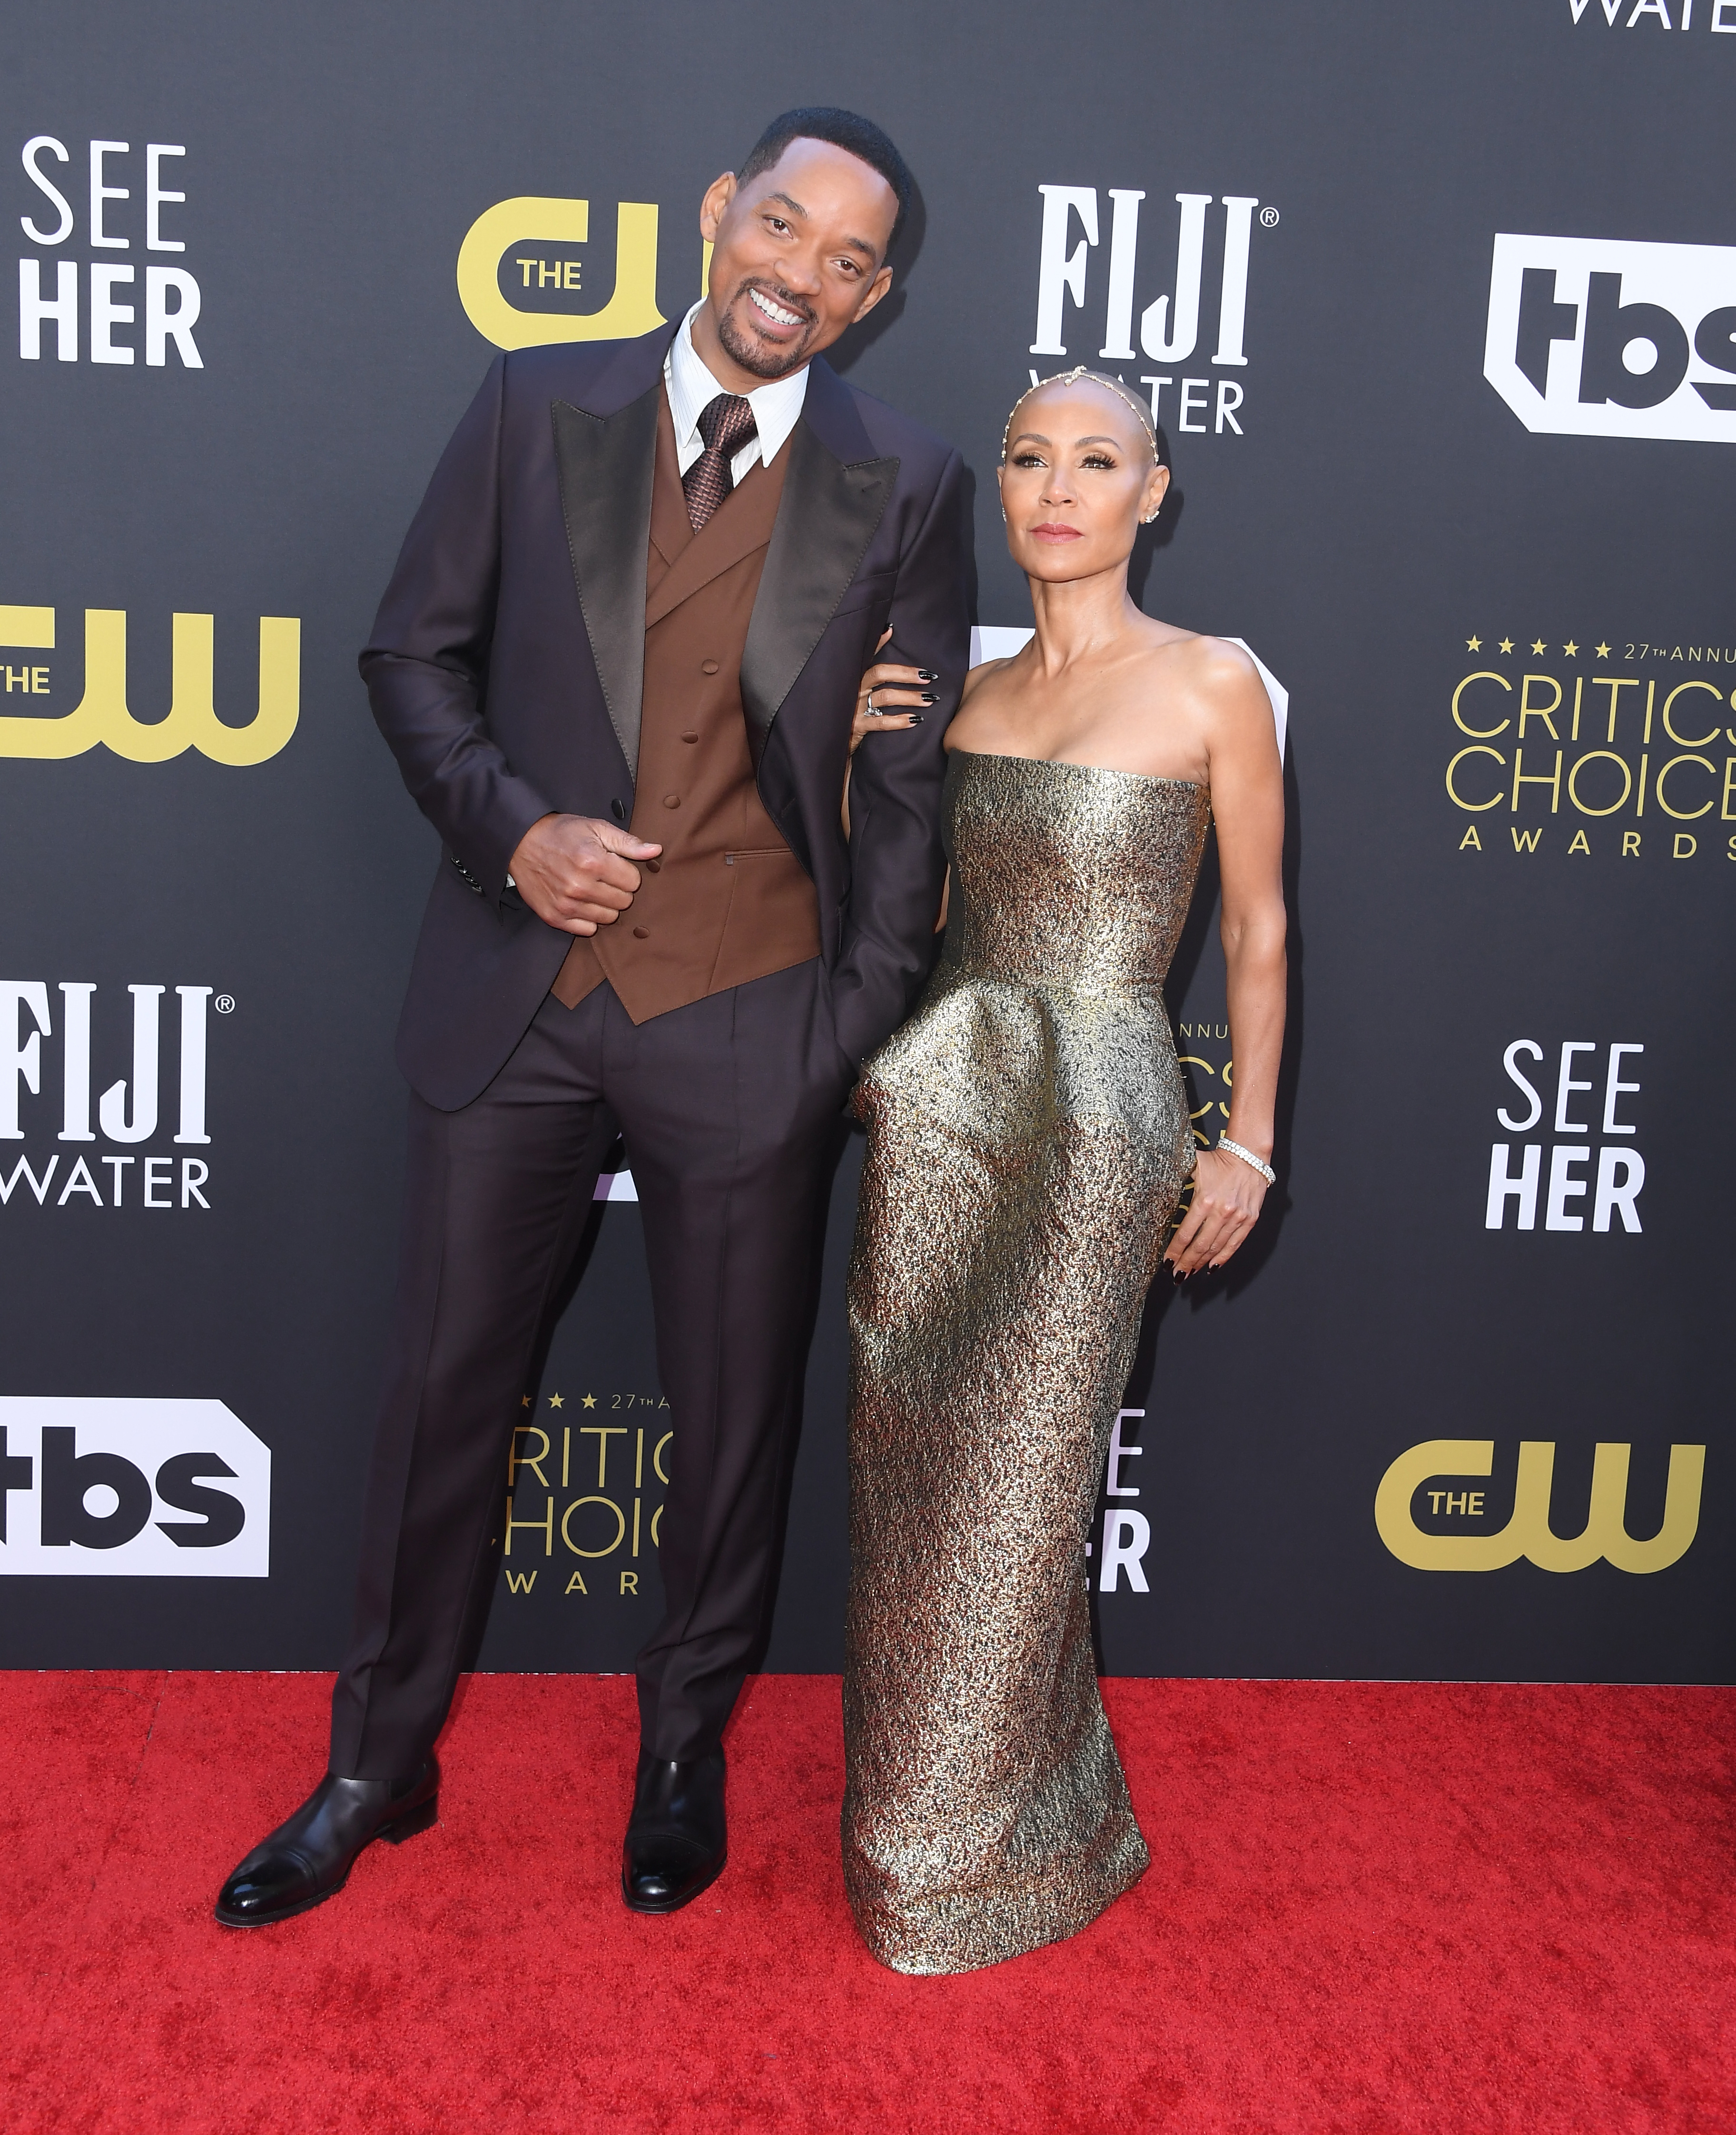 Will and Jada pose for photographers on the red carpet